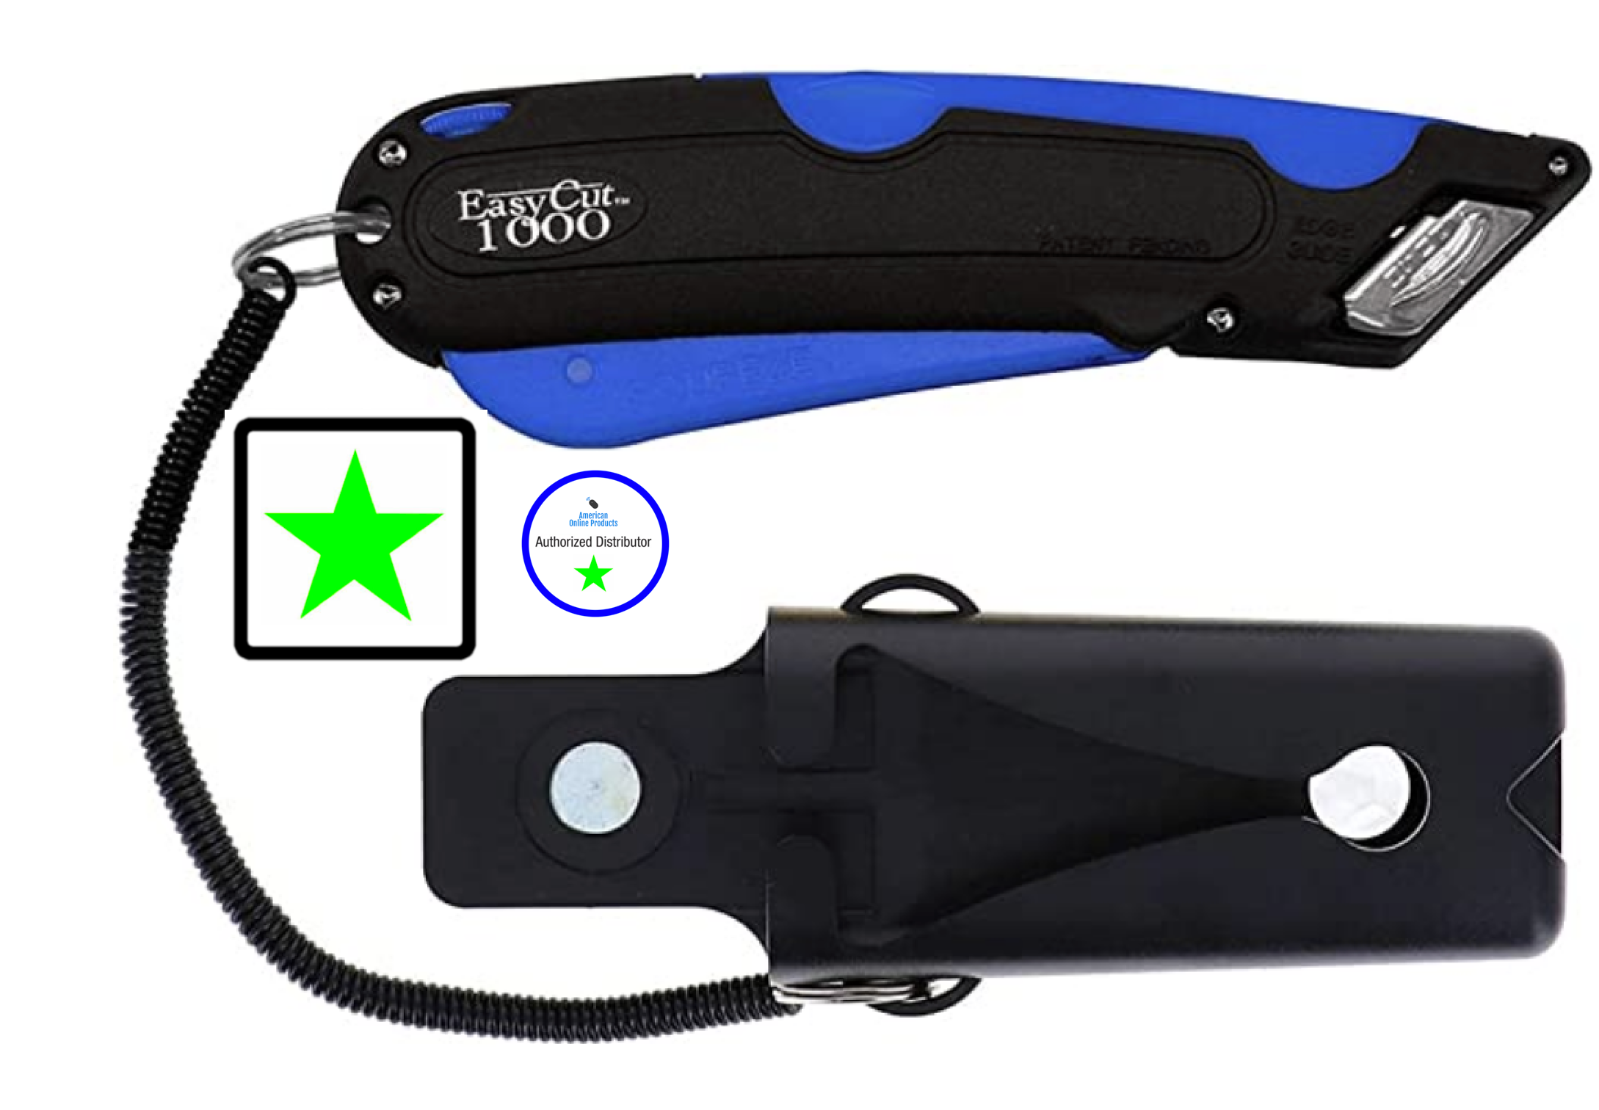 Easy Cut 1000 Blue Safety Box Cutter Knife 2 Blades; Holster Lanyard Easycut